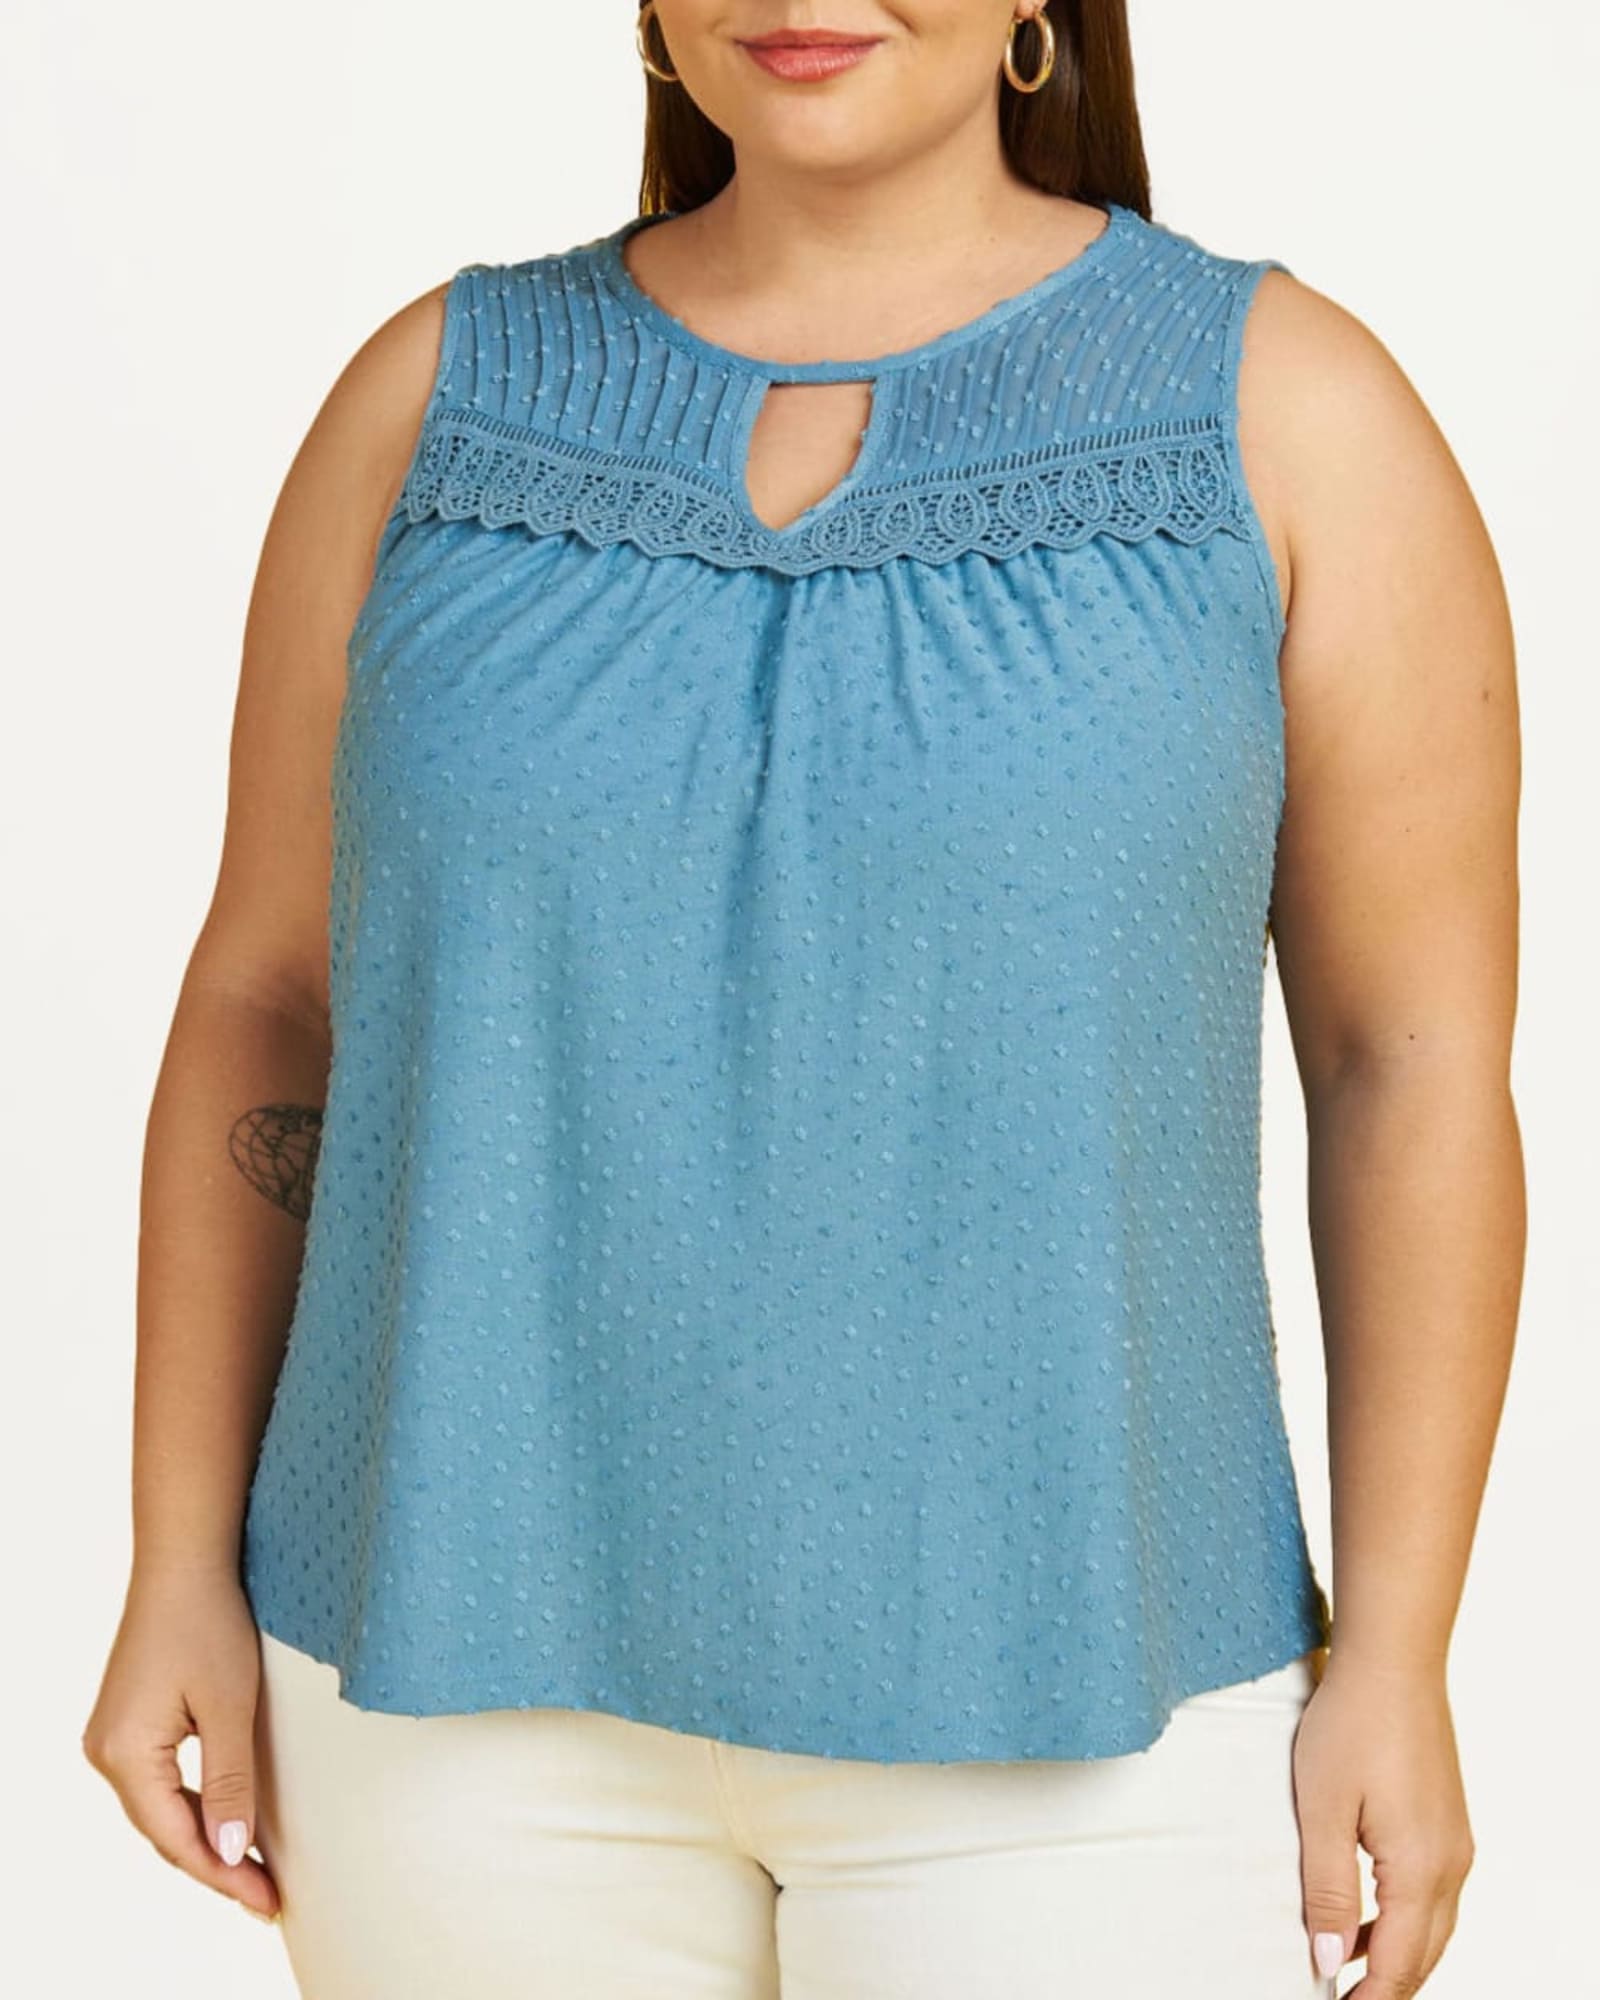 Layla Knit Tank Top with Lace | L180 BLUE HEAVEN